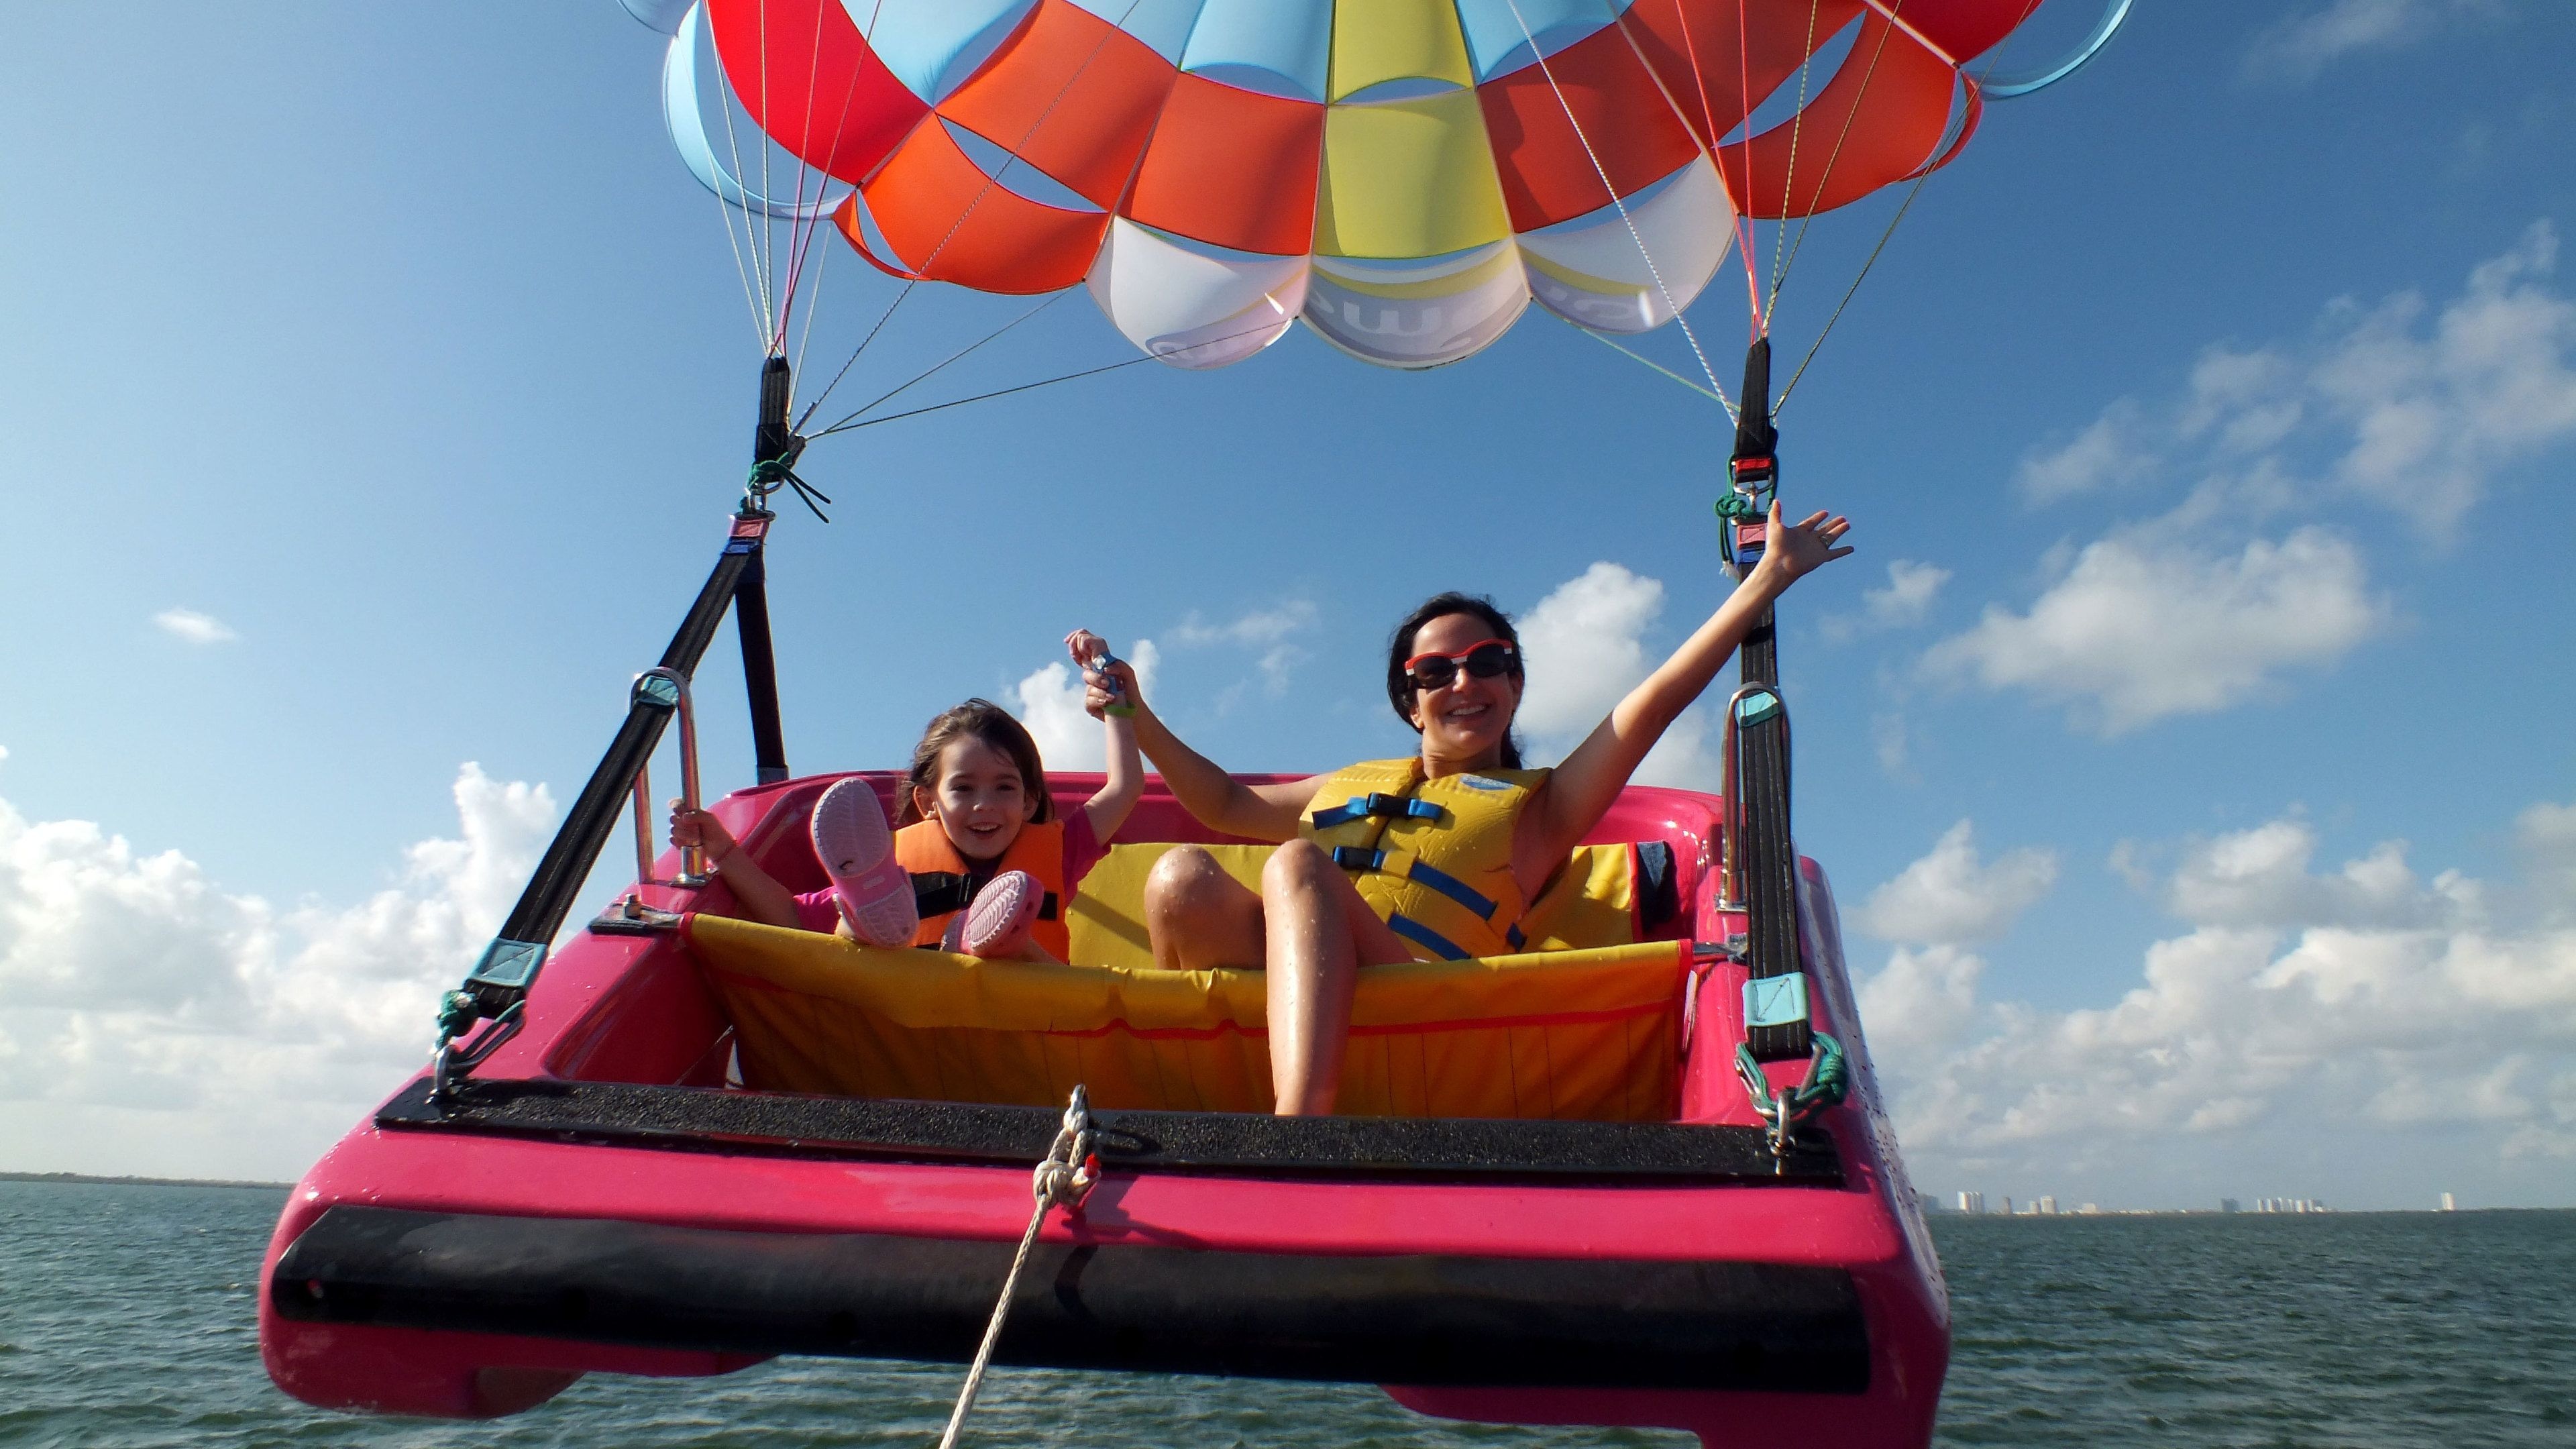 Parasailing: Sky Rider, The Caribbean Sea, Parakiting in Cancun, People parasail behind the boat. 3840x2160 4K Background.